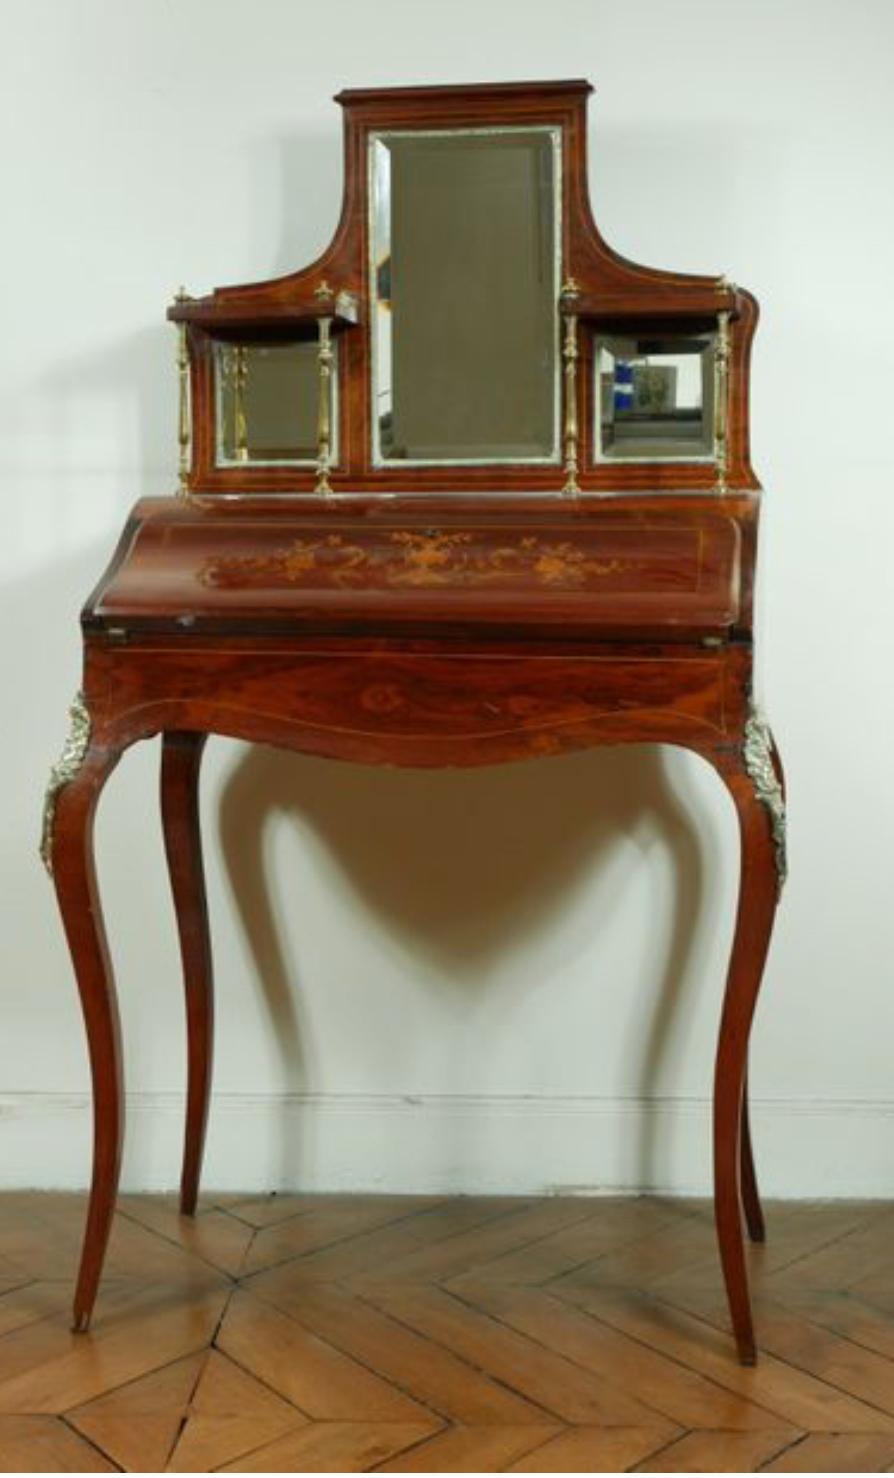 This is a beautiful antique mahogany inlaid Bonheur Du Jour, or Ladies writing desk, circa 1890 in date. The fall front opens to reveal an interior of leather writing surface, and bank of three drawers. The top has three mirrors with brass